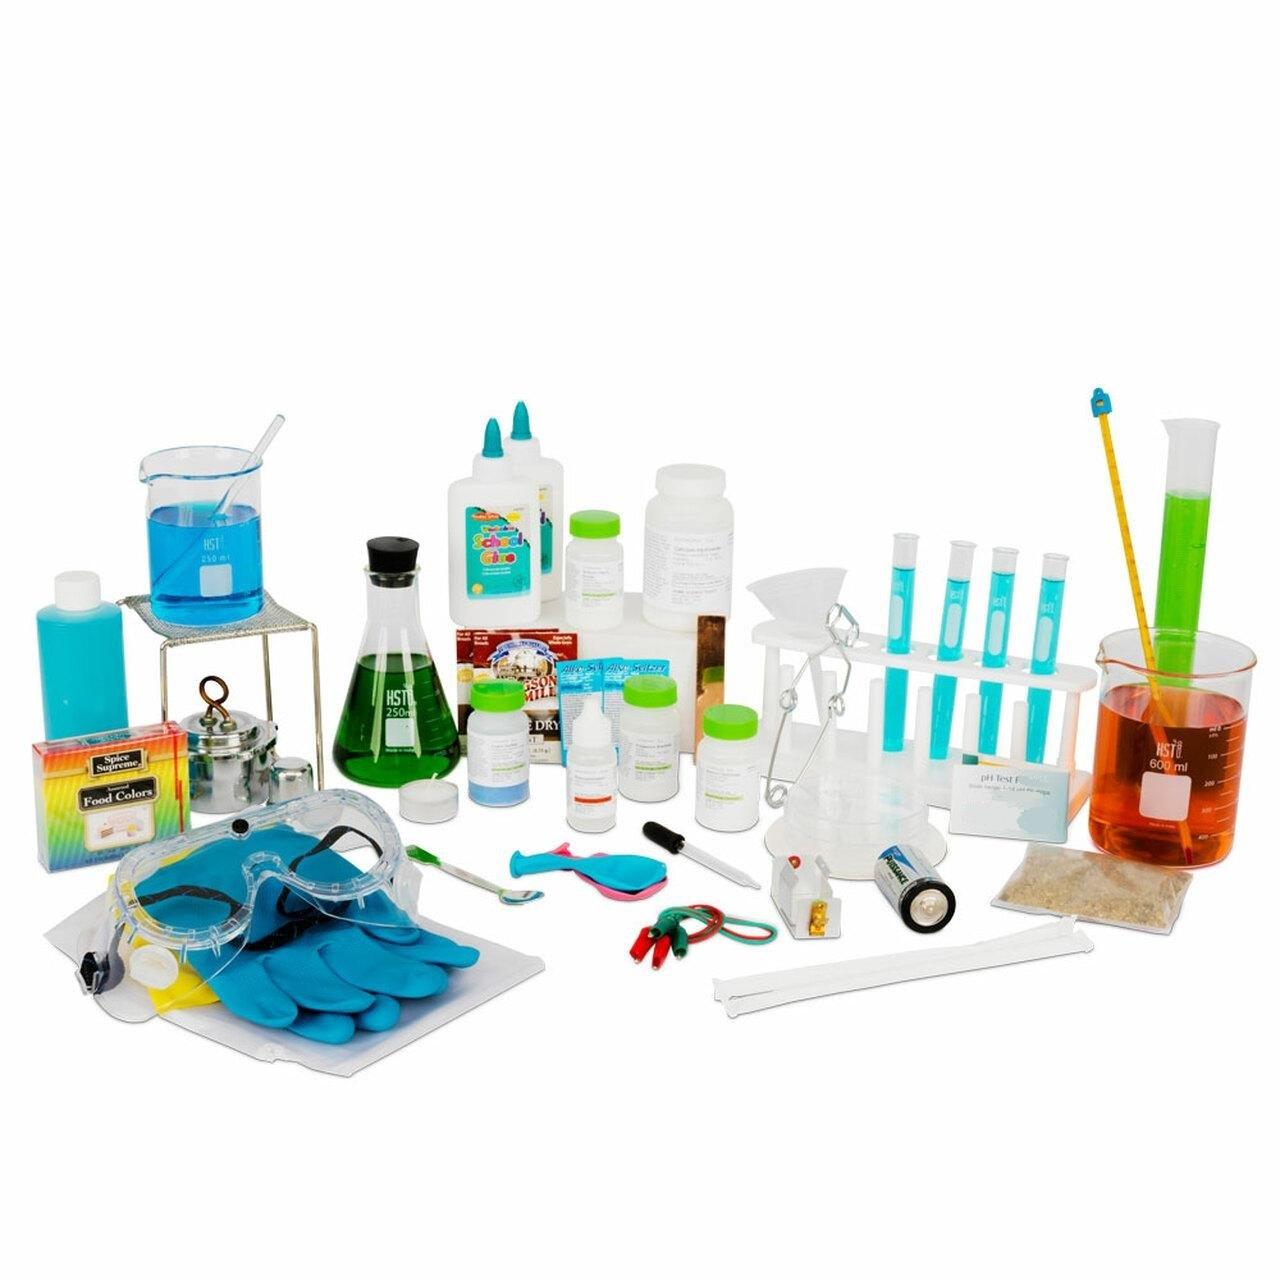 Complete Introduction to Chemistry Kit